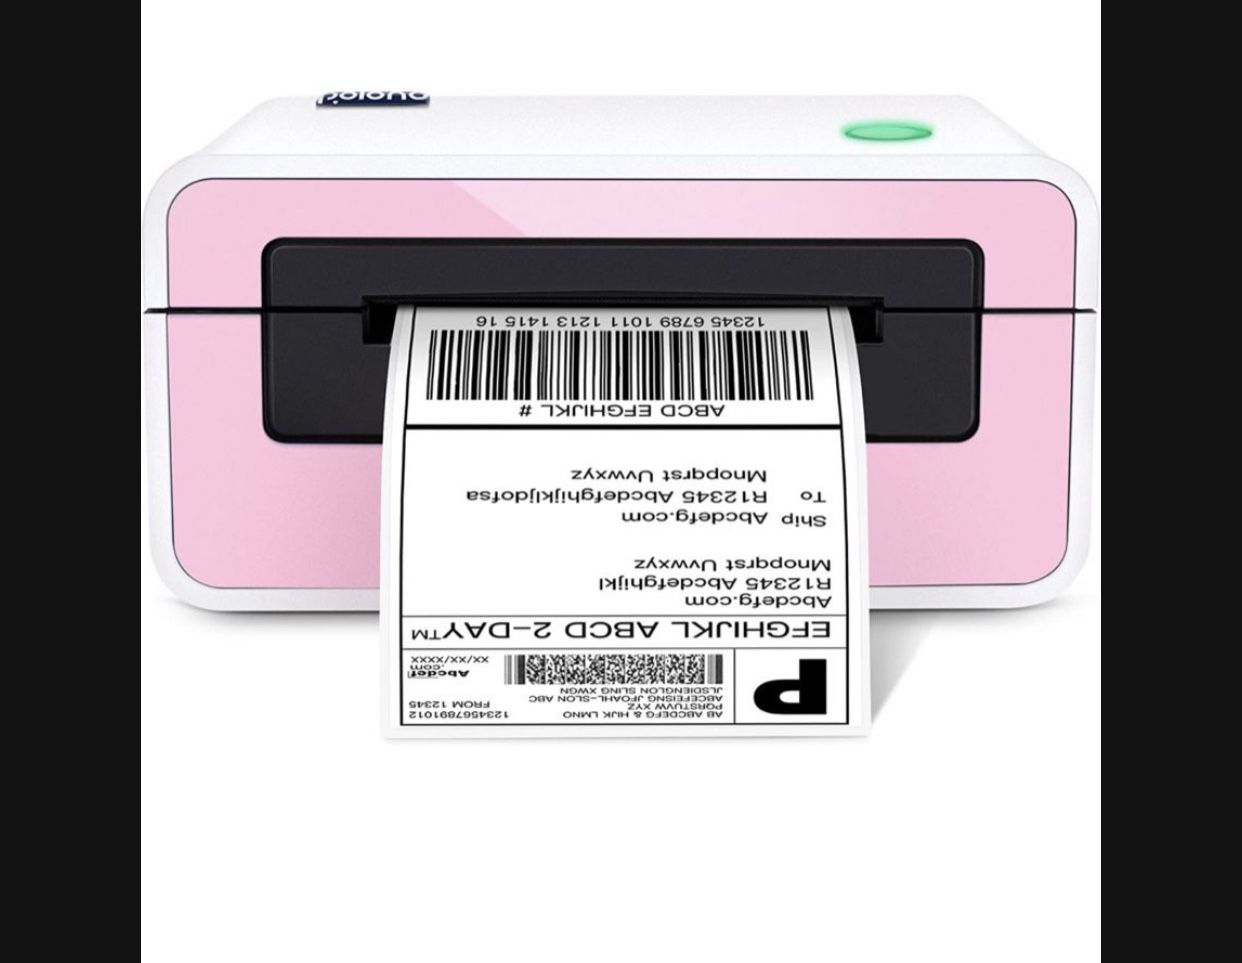 Shipping Label Printer4x6 Label Printer for Shipping PackagesPinkThermal Label Printer Compatible with Windows,Mac,WidelyUsed for Ebay, Amazo